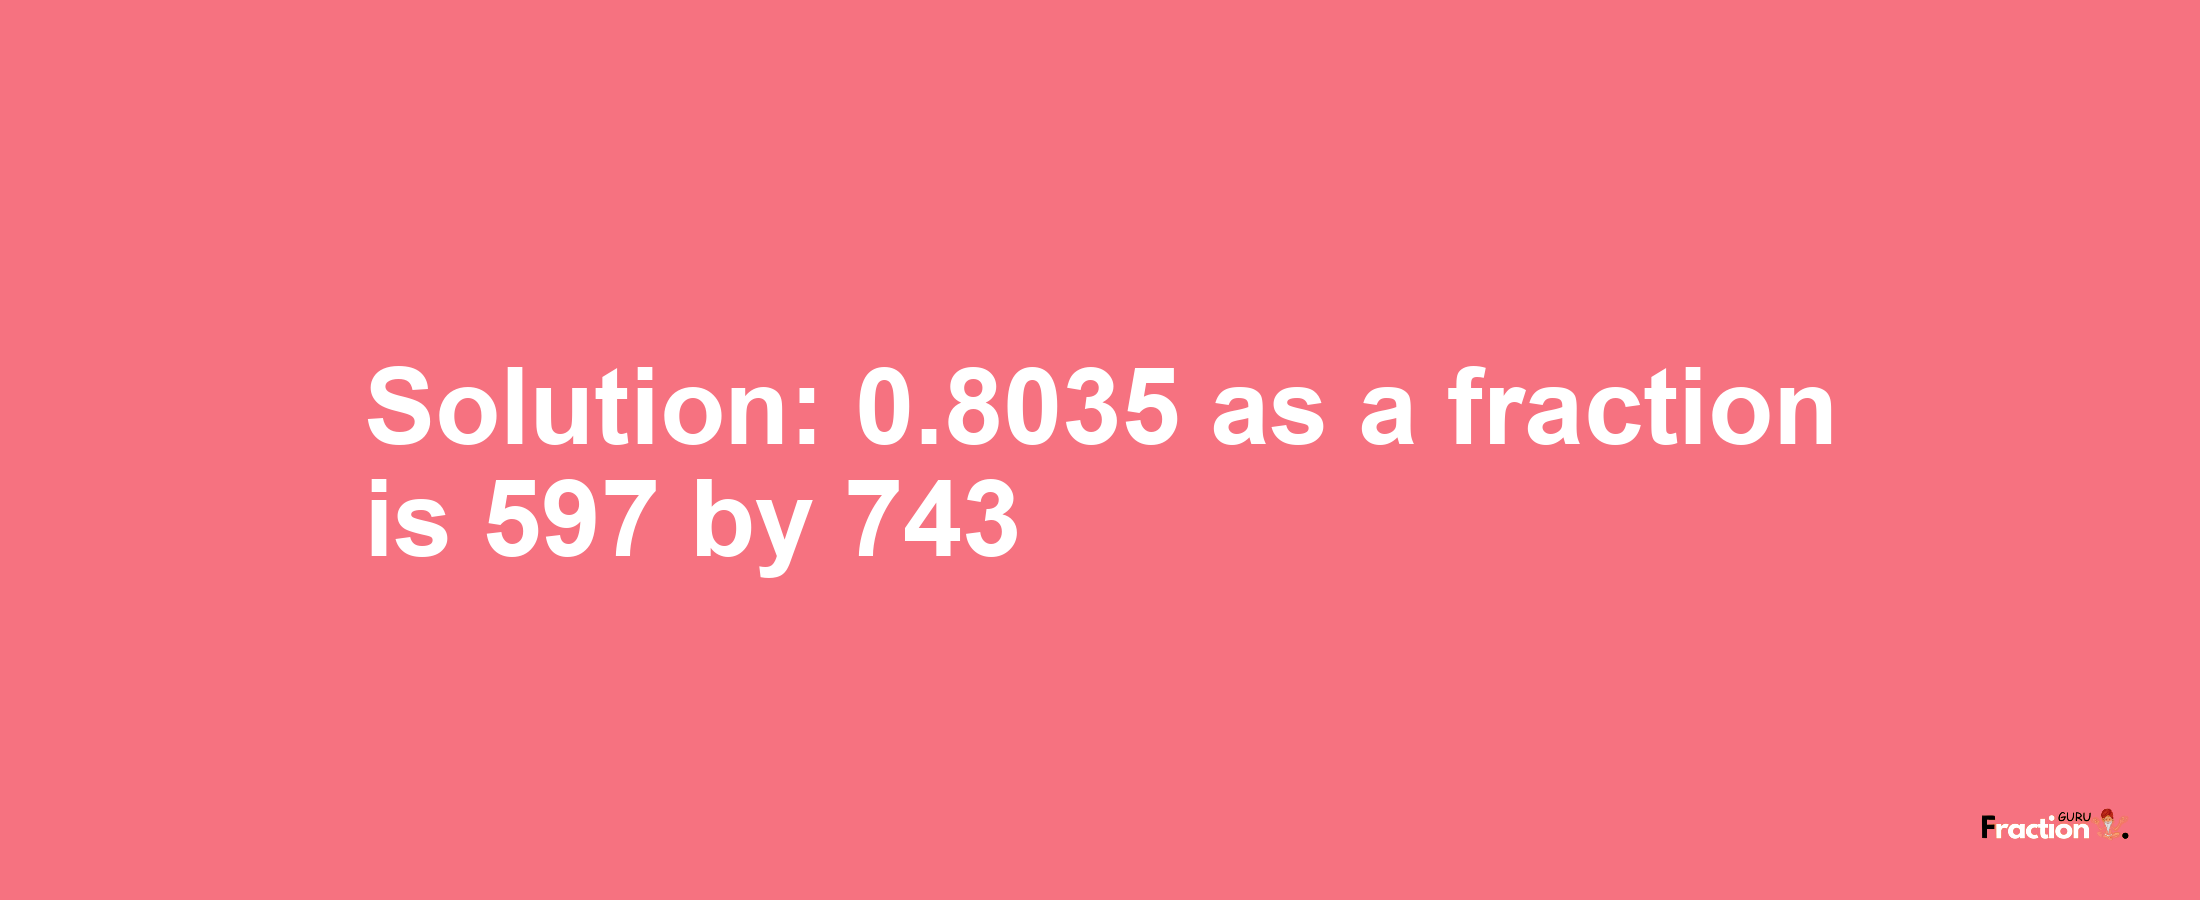 Solution:0.8035 as a fraction is 597/743